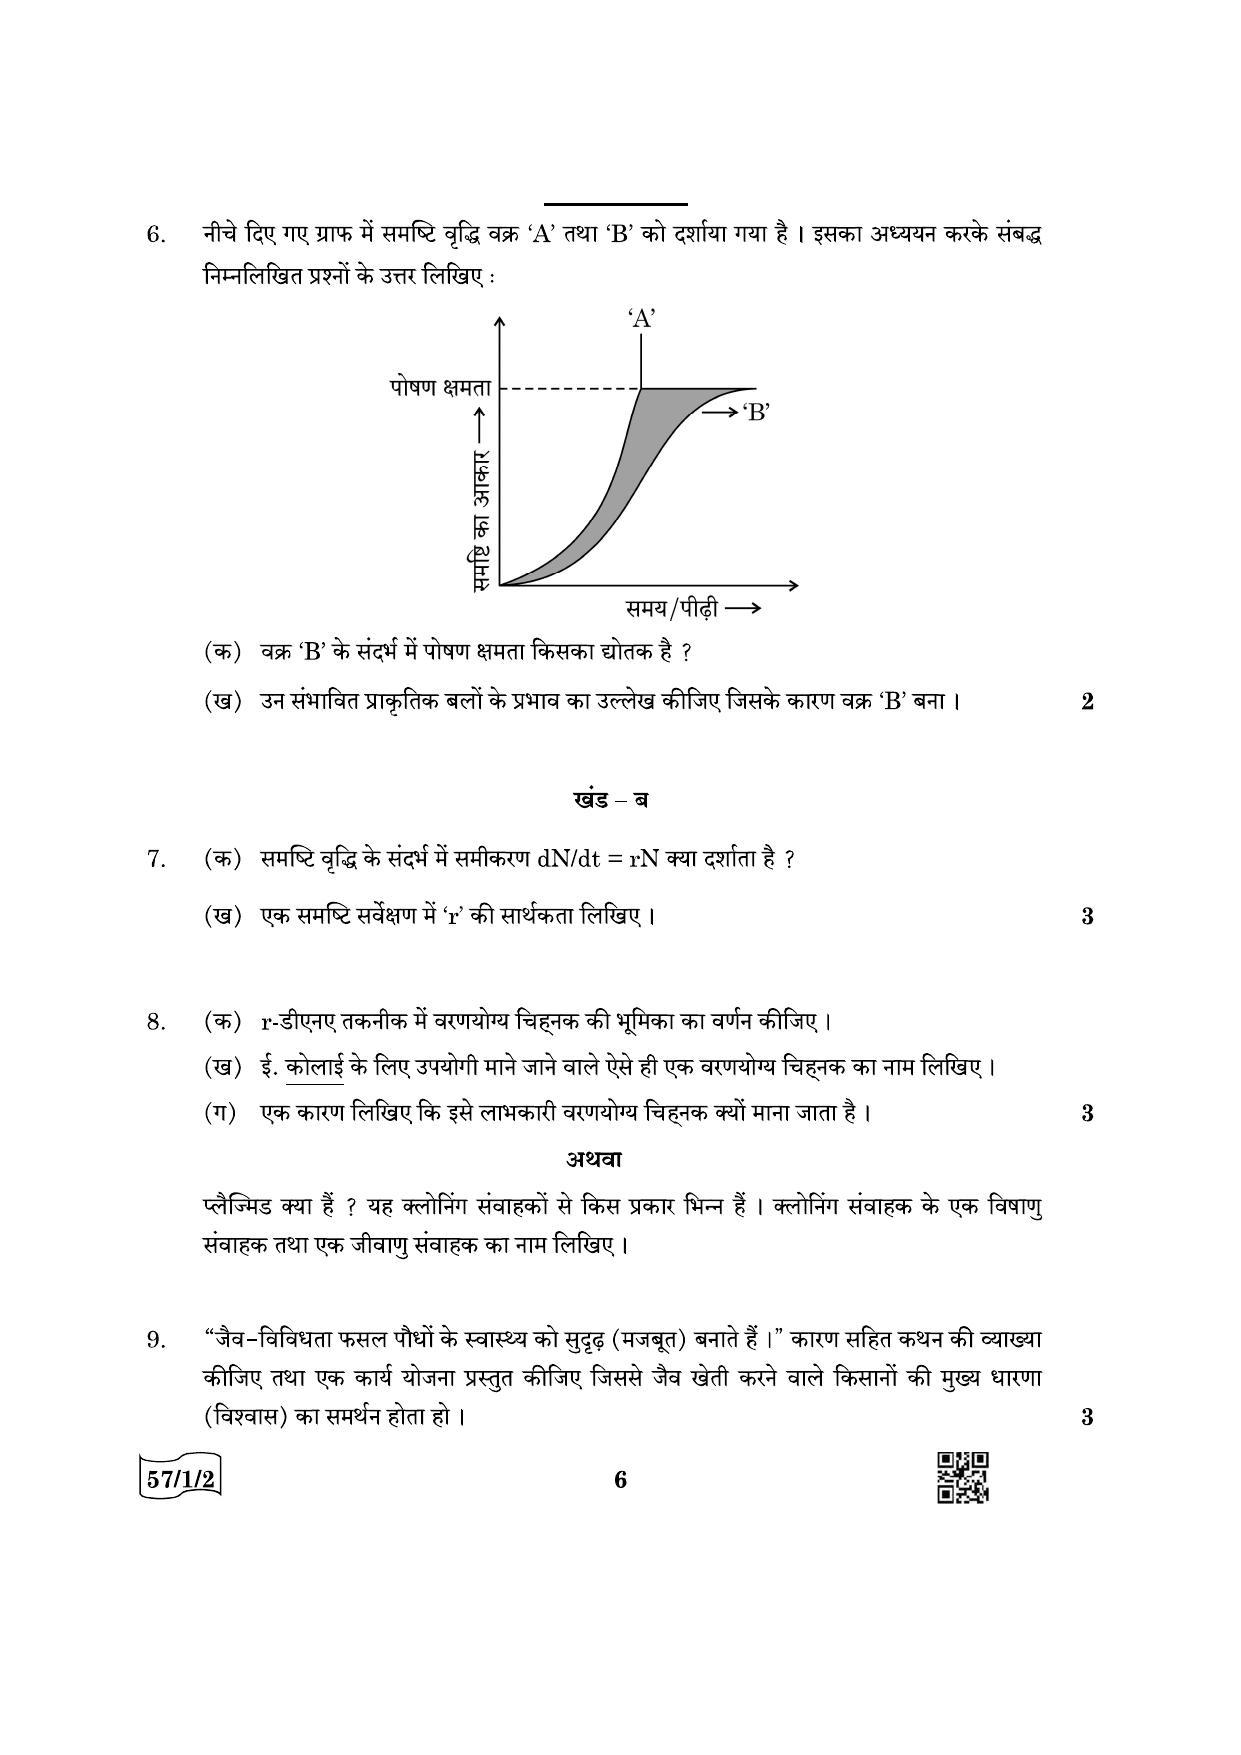 CBSE Class 12 57-1-2 Biology 2022 Question Paper - Page 6